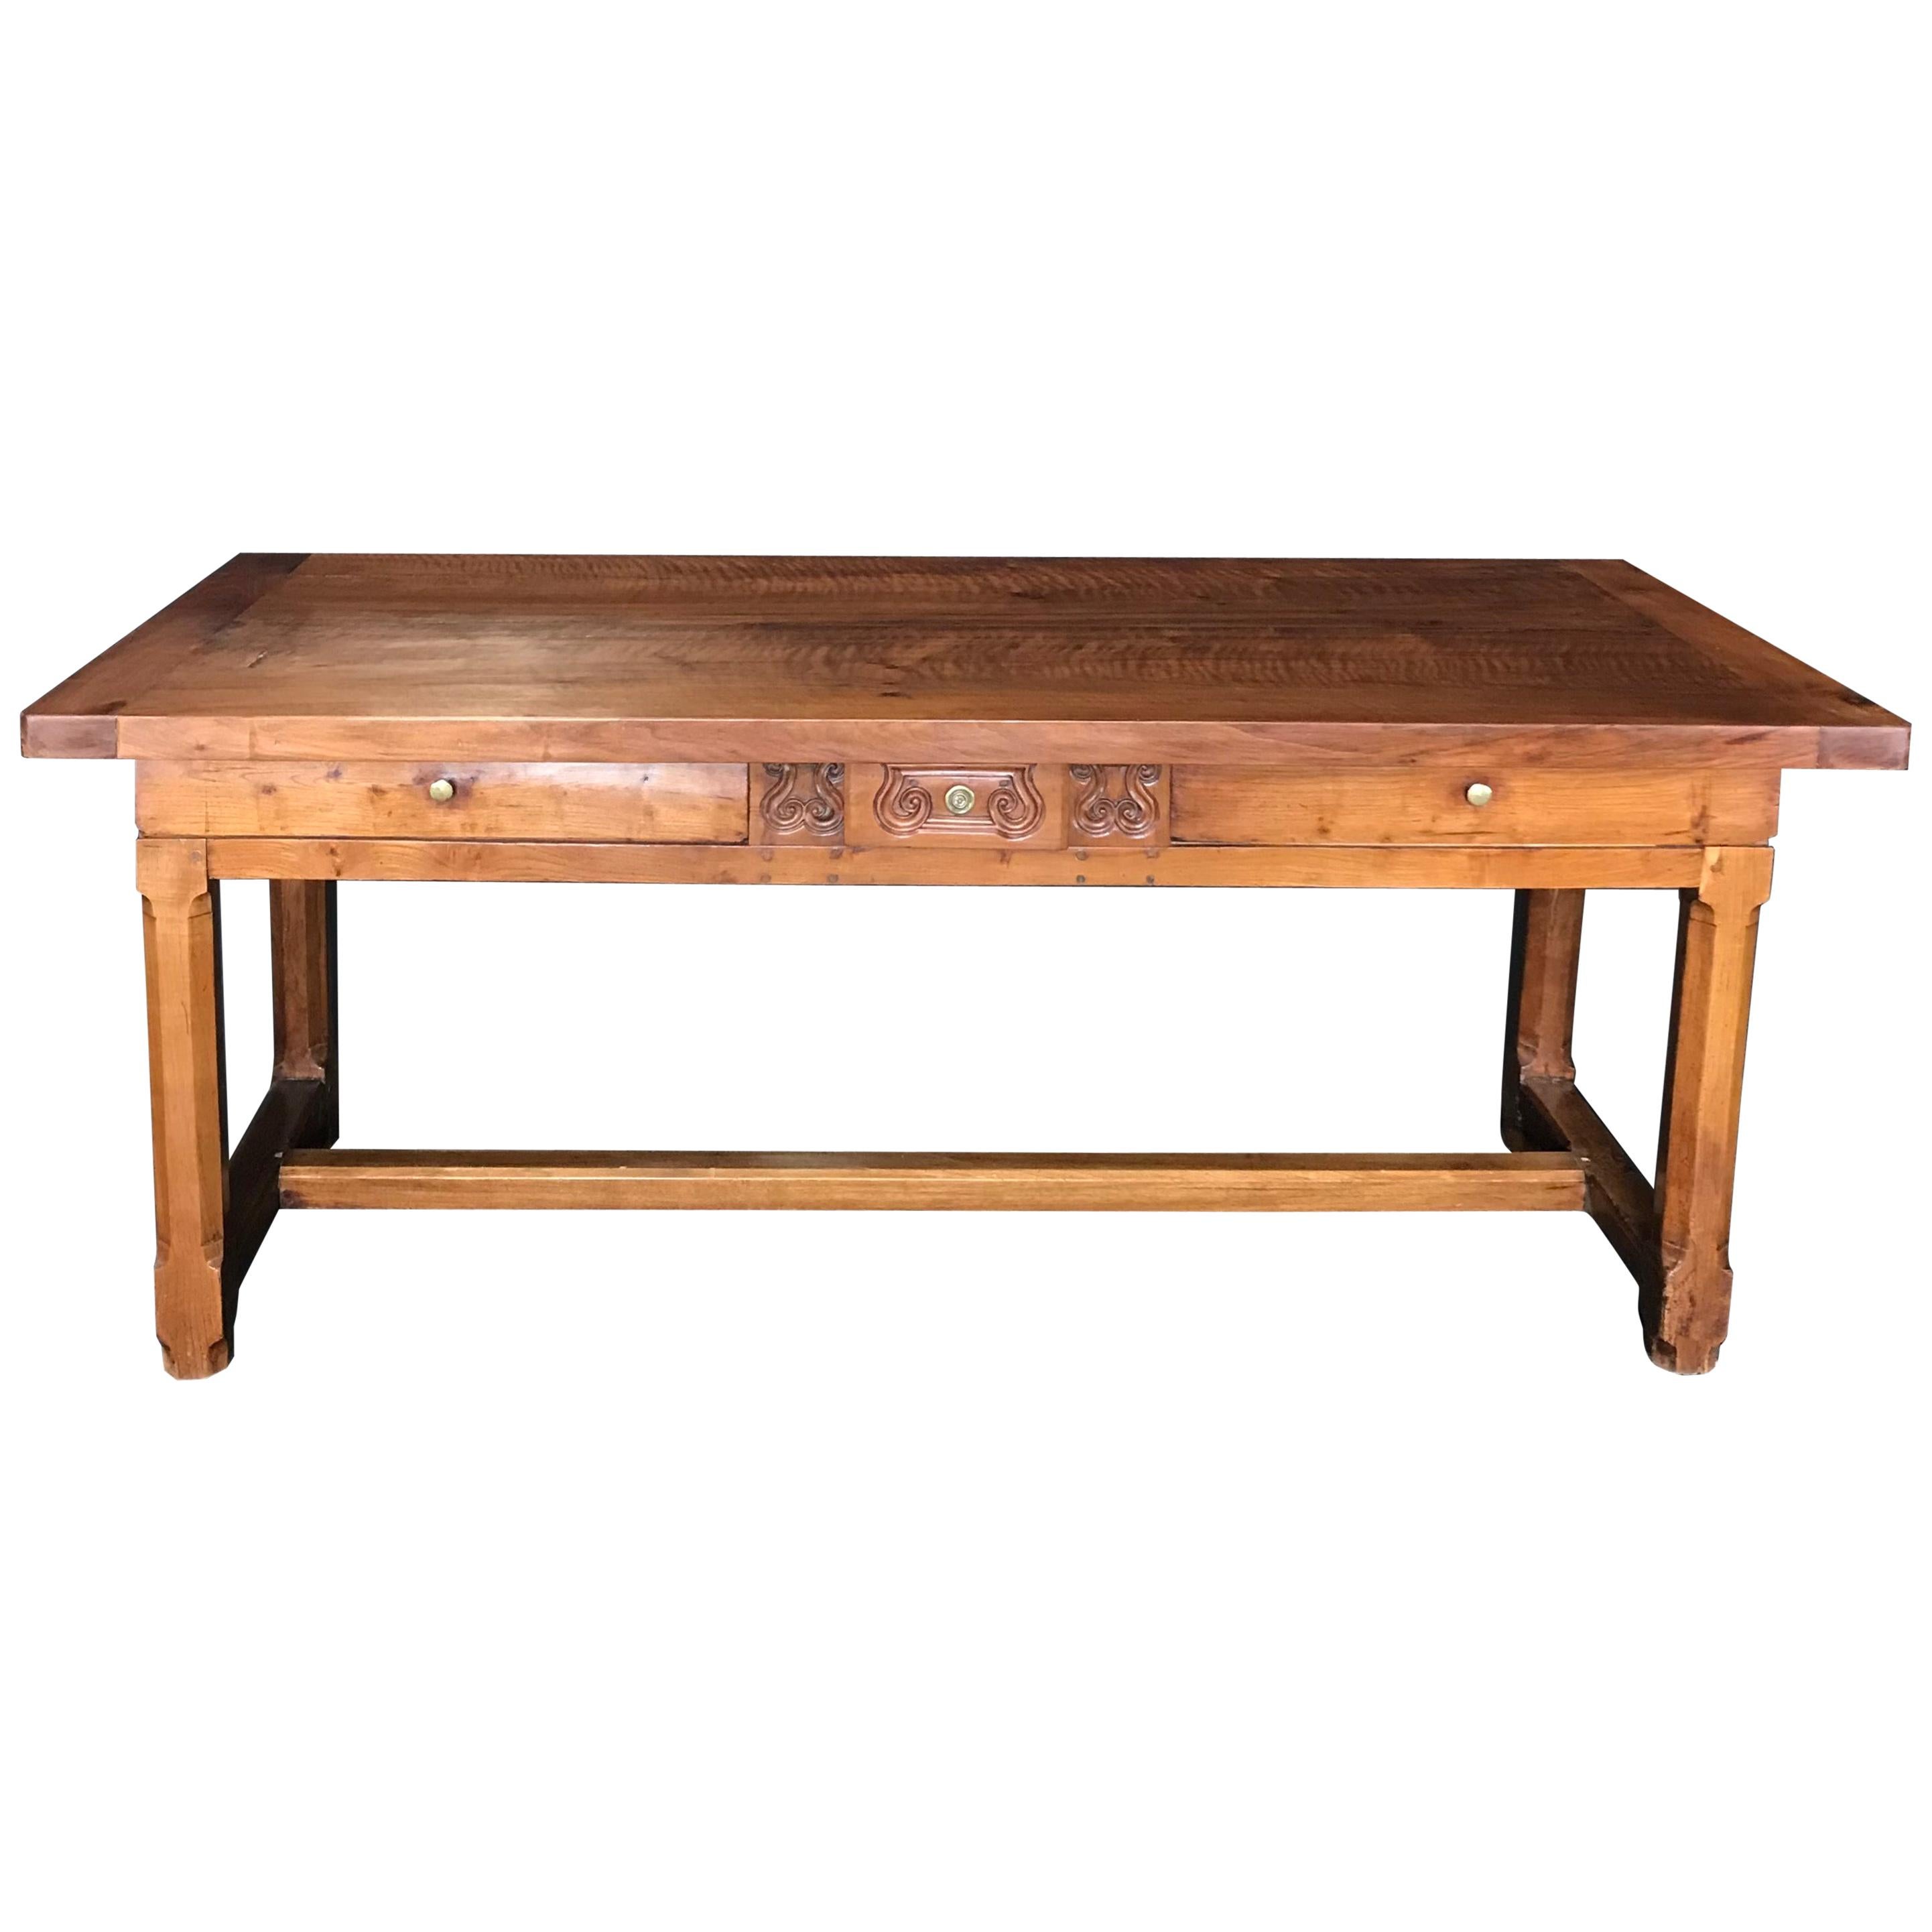 Exceptional Antique French Cherry Farm Dining Table